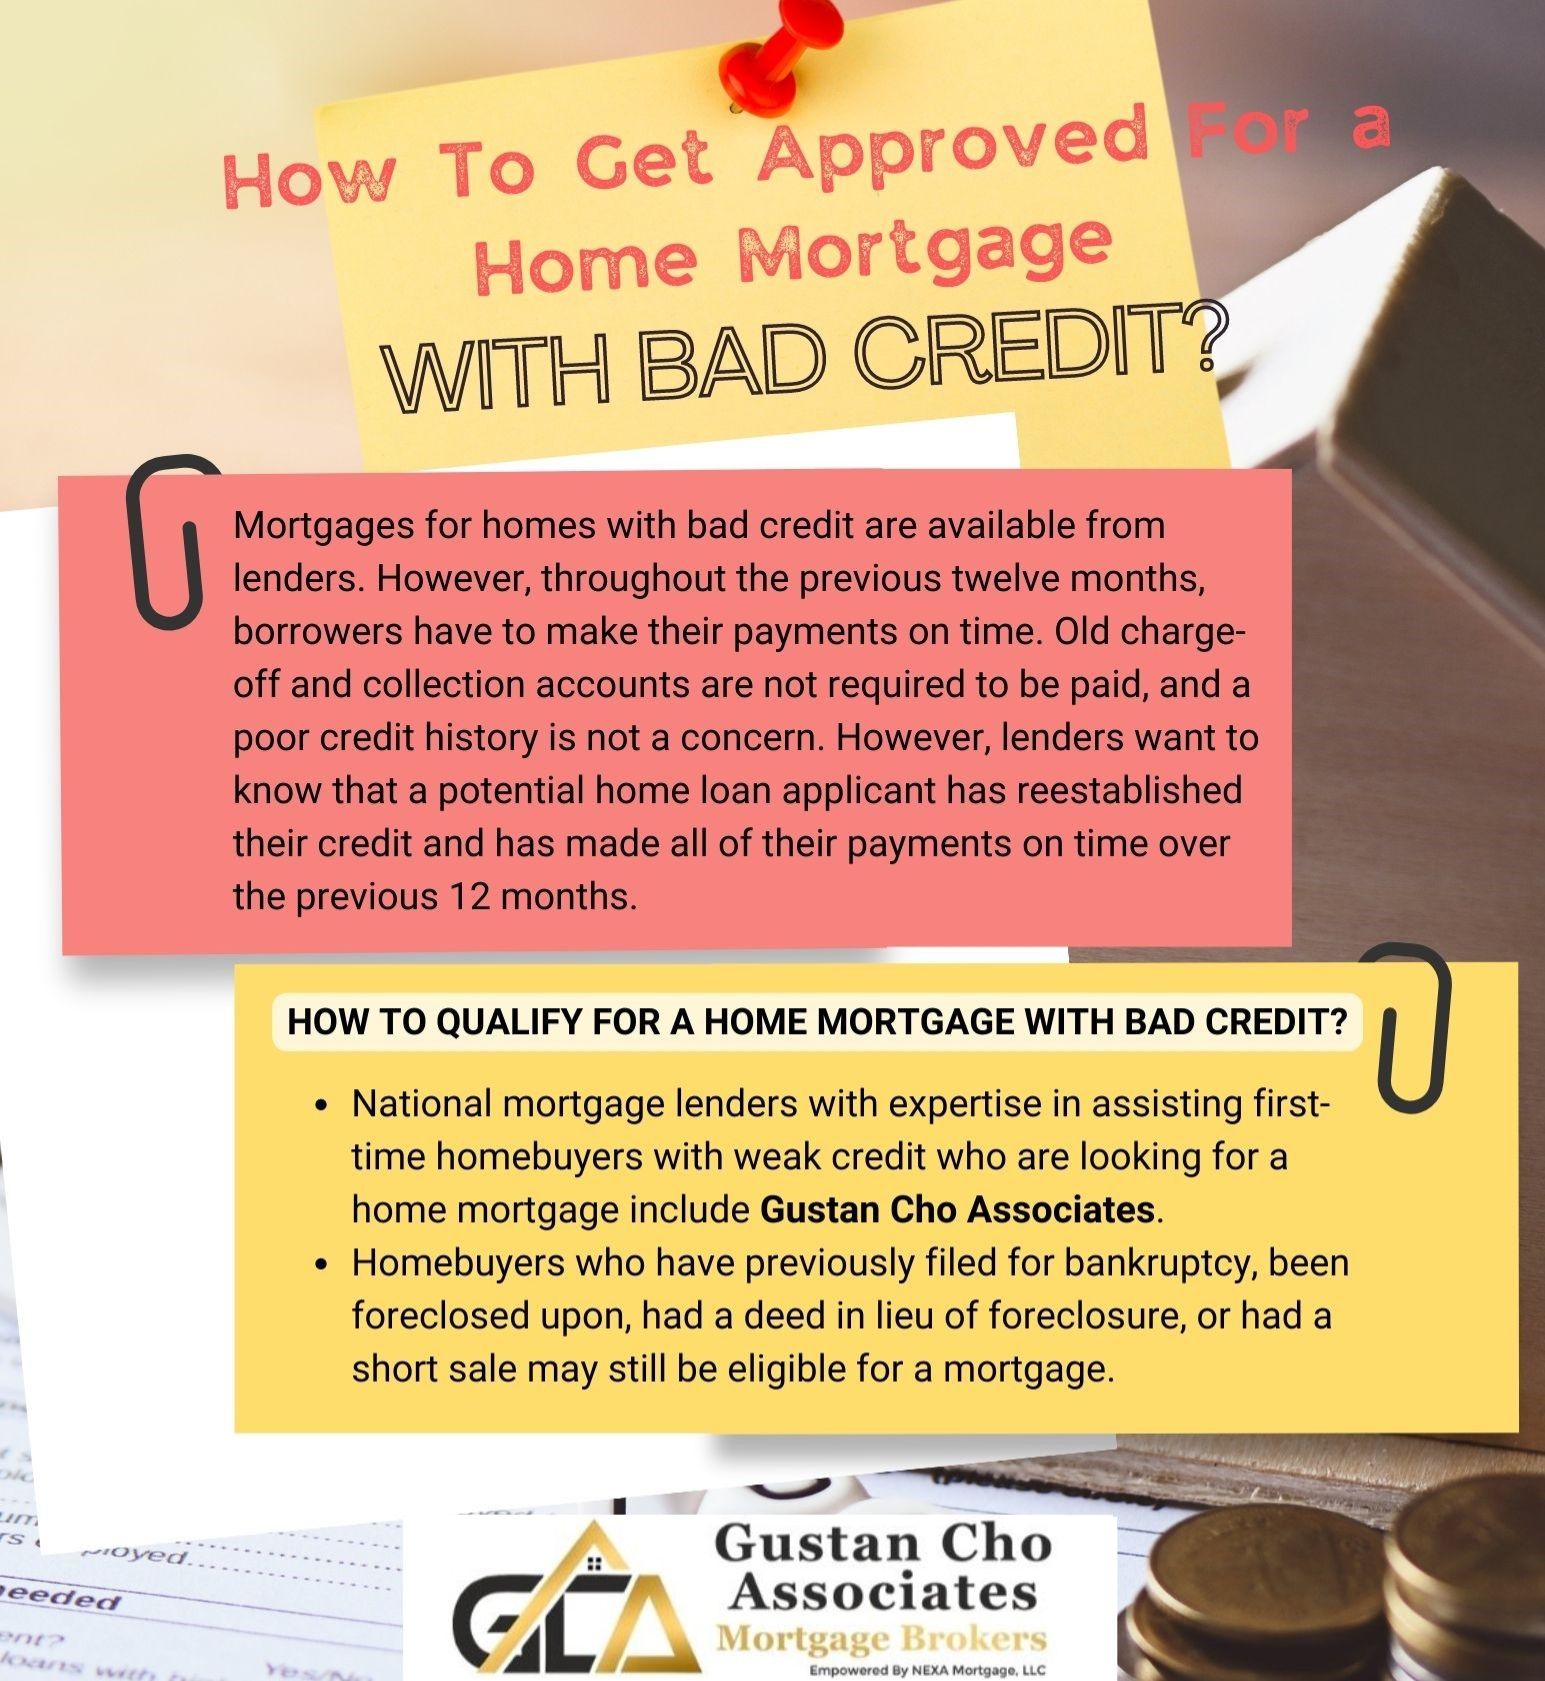 How To Get Approved For a Home Mortgage With Bad Credit